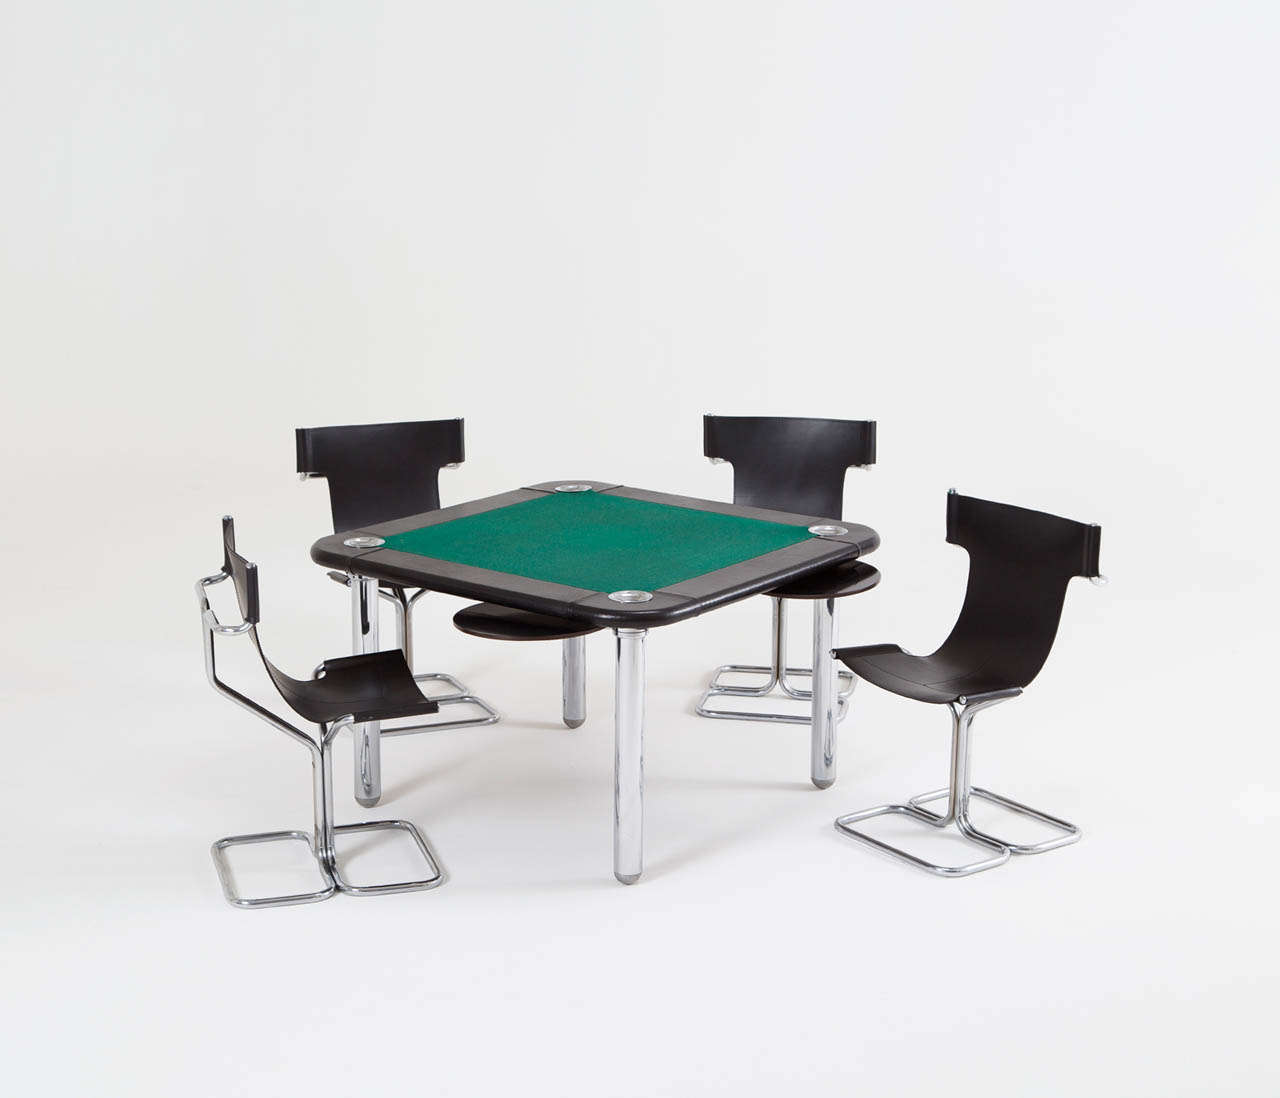 Excellent gaming table in chrome and leather finish. The table has a green gaming cloth with leather edges with four stainless steel bowls for gaming chips, and chromed tubular legs.

The four chairs are also in original condition in leather with